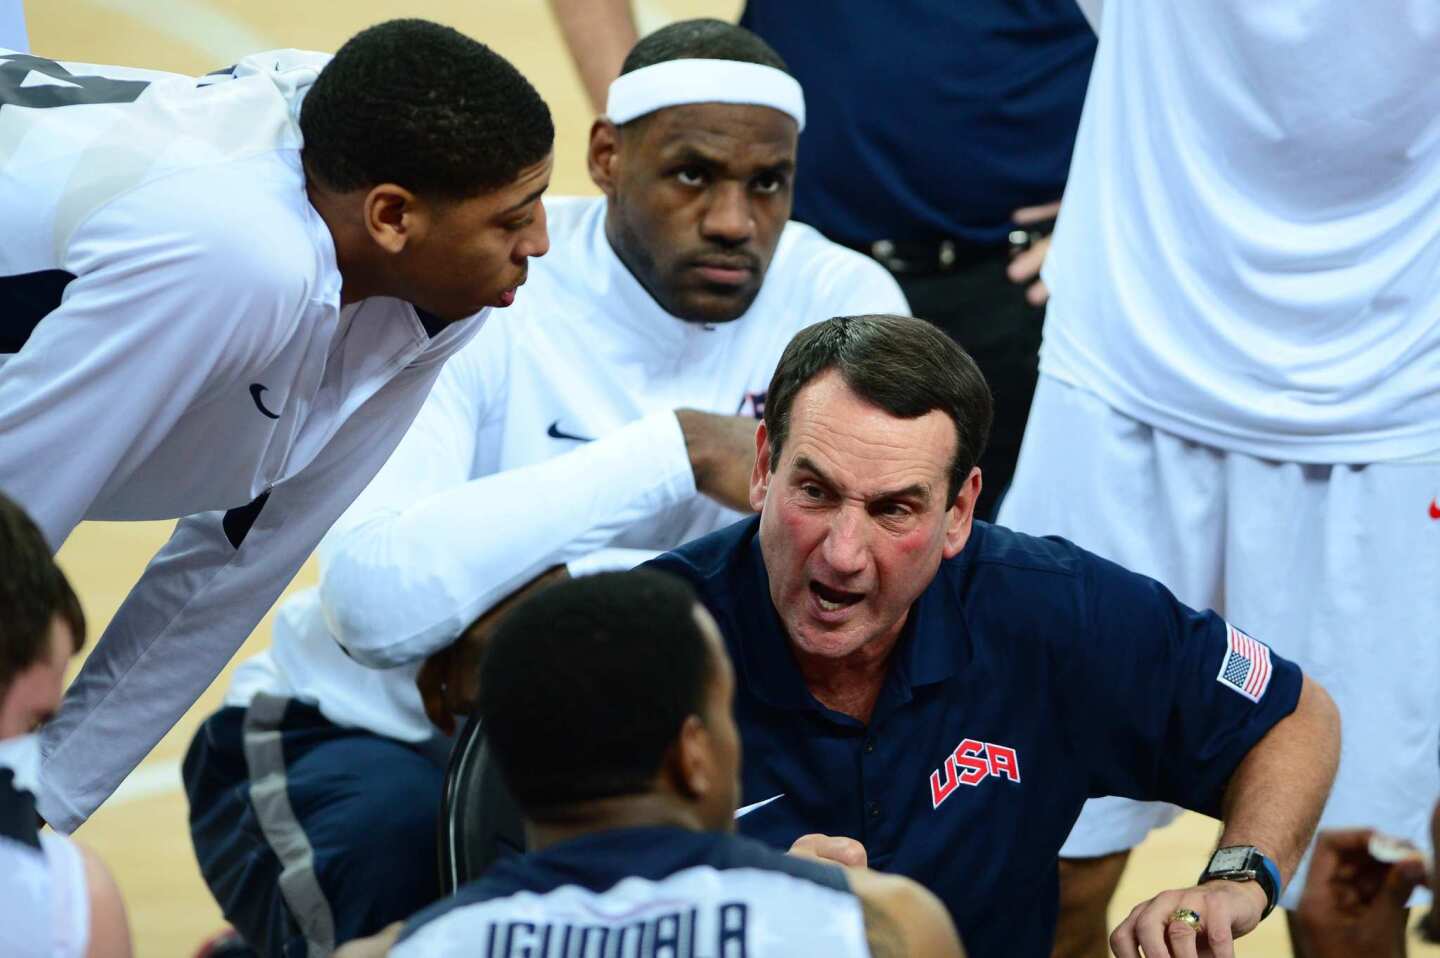 U.S. coach Michael Krzyzewski gives his team instructions during the men's final basketball game at the 2012 London Olympics.